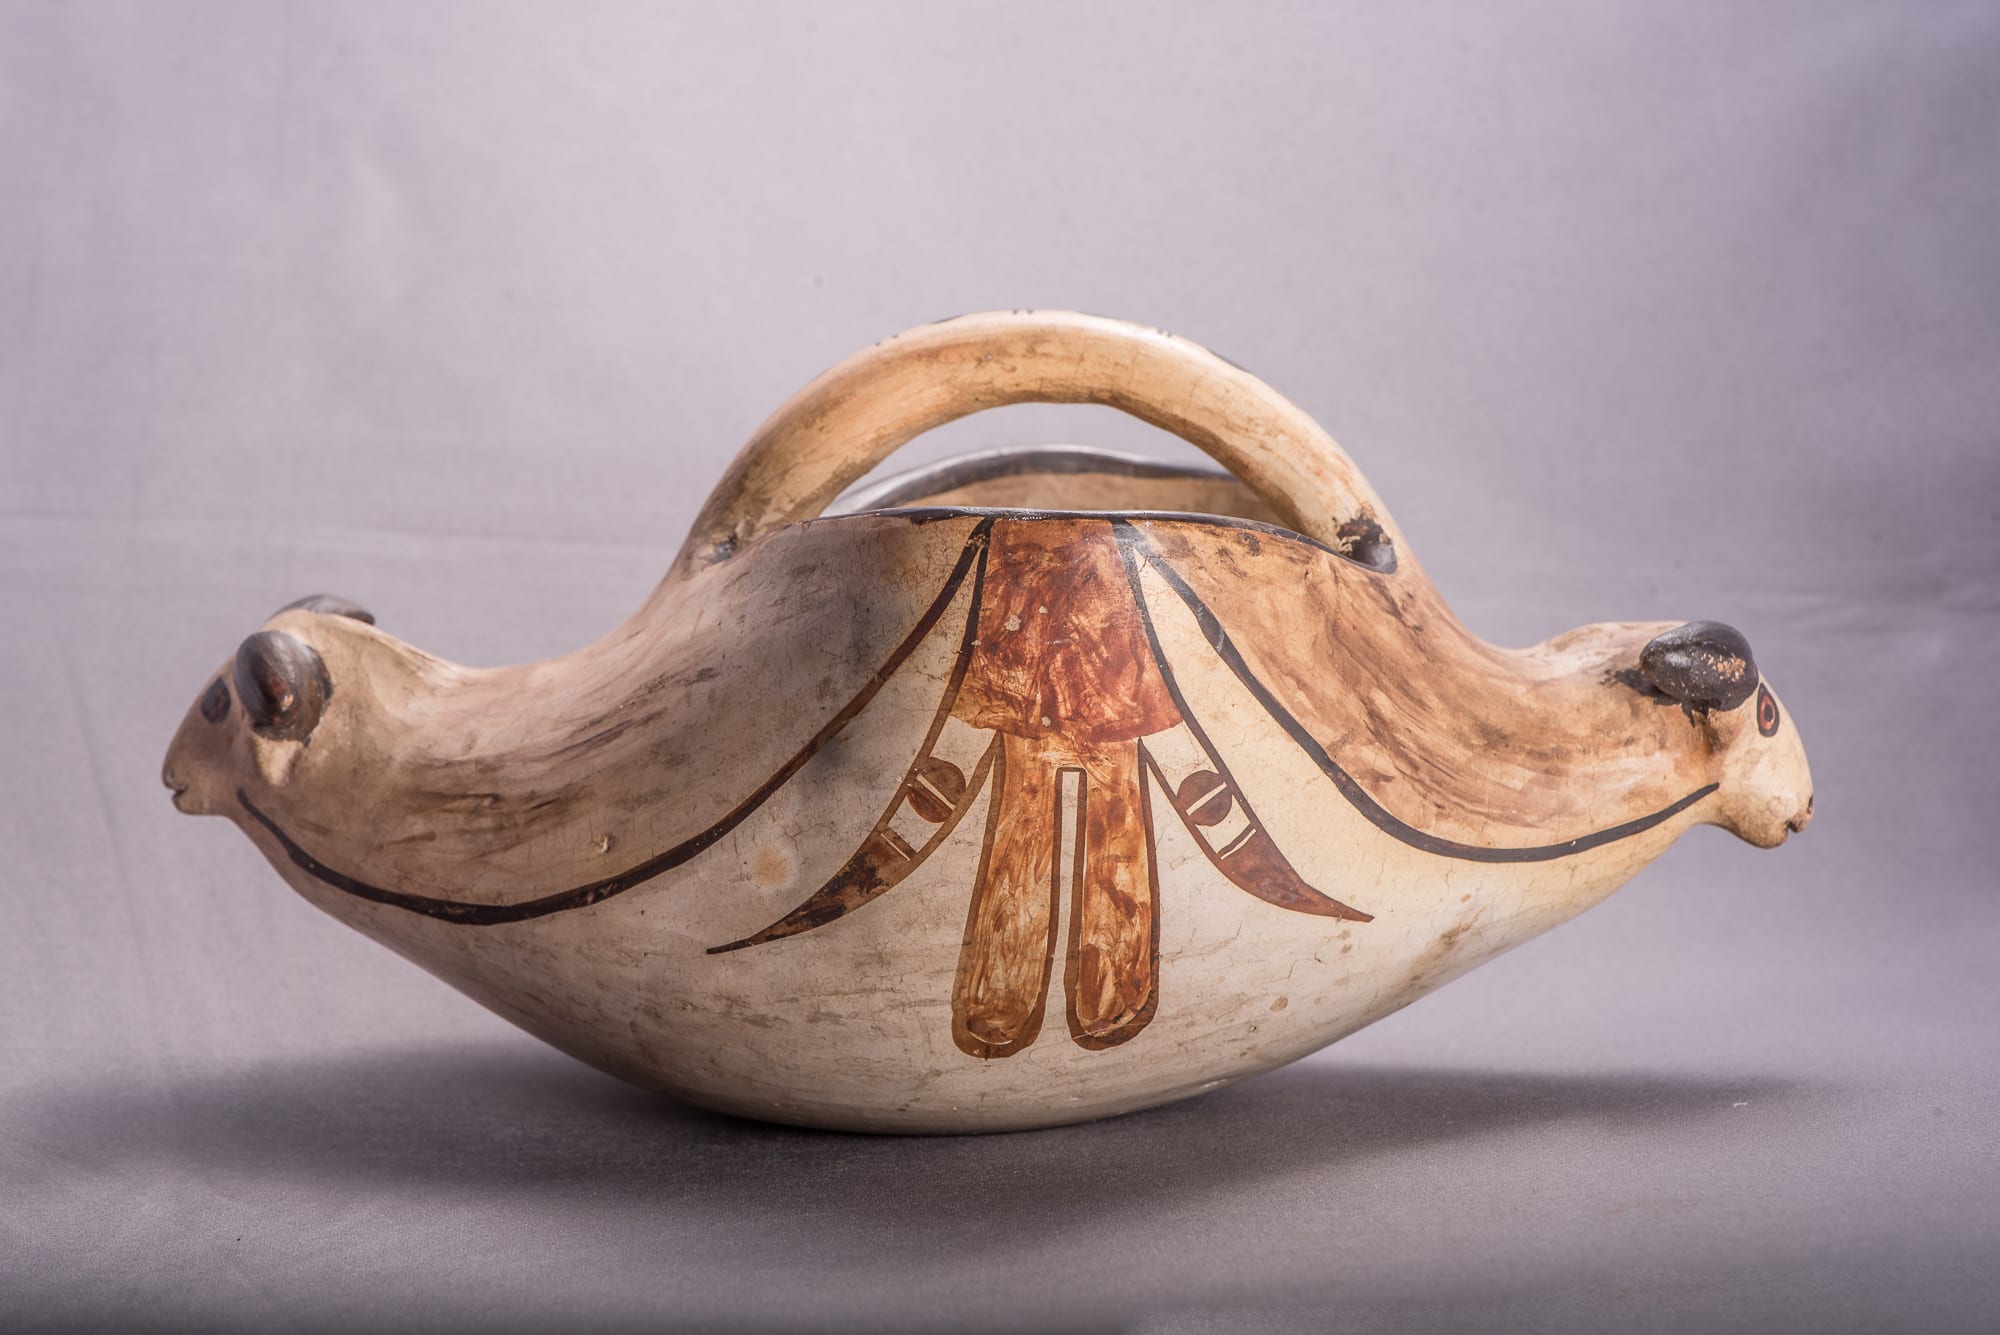 2014-17 Effigy pot with mountain sheep heads and handle